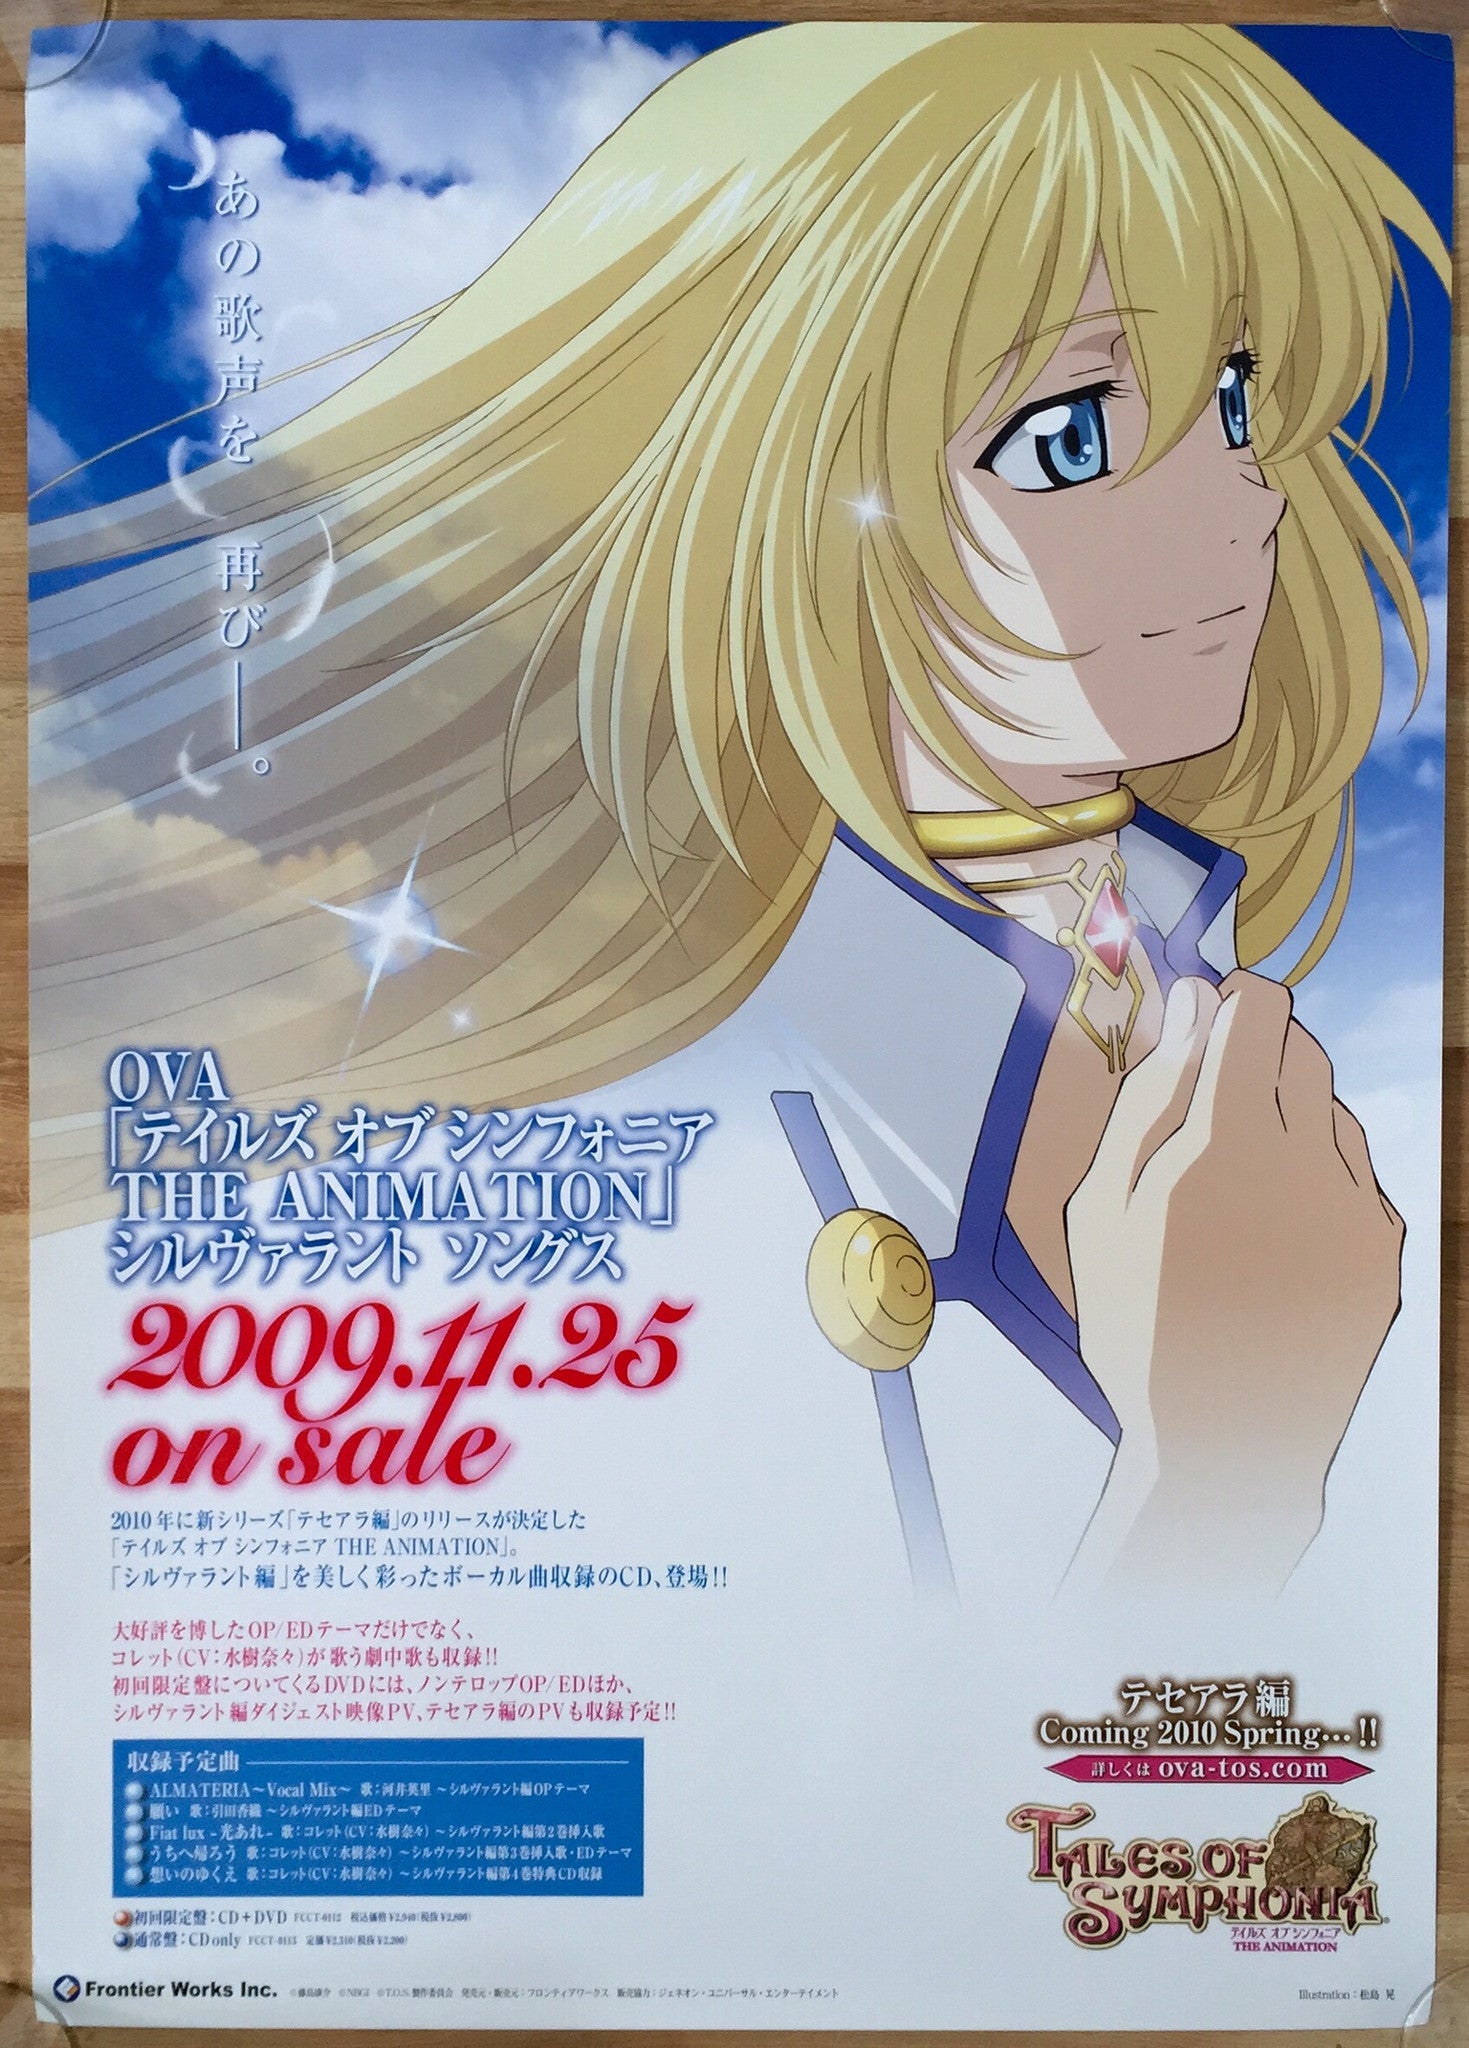 Tales of Symphonia (B2) Japanese Promotional Poster #1